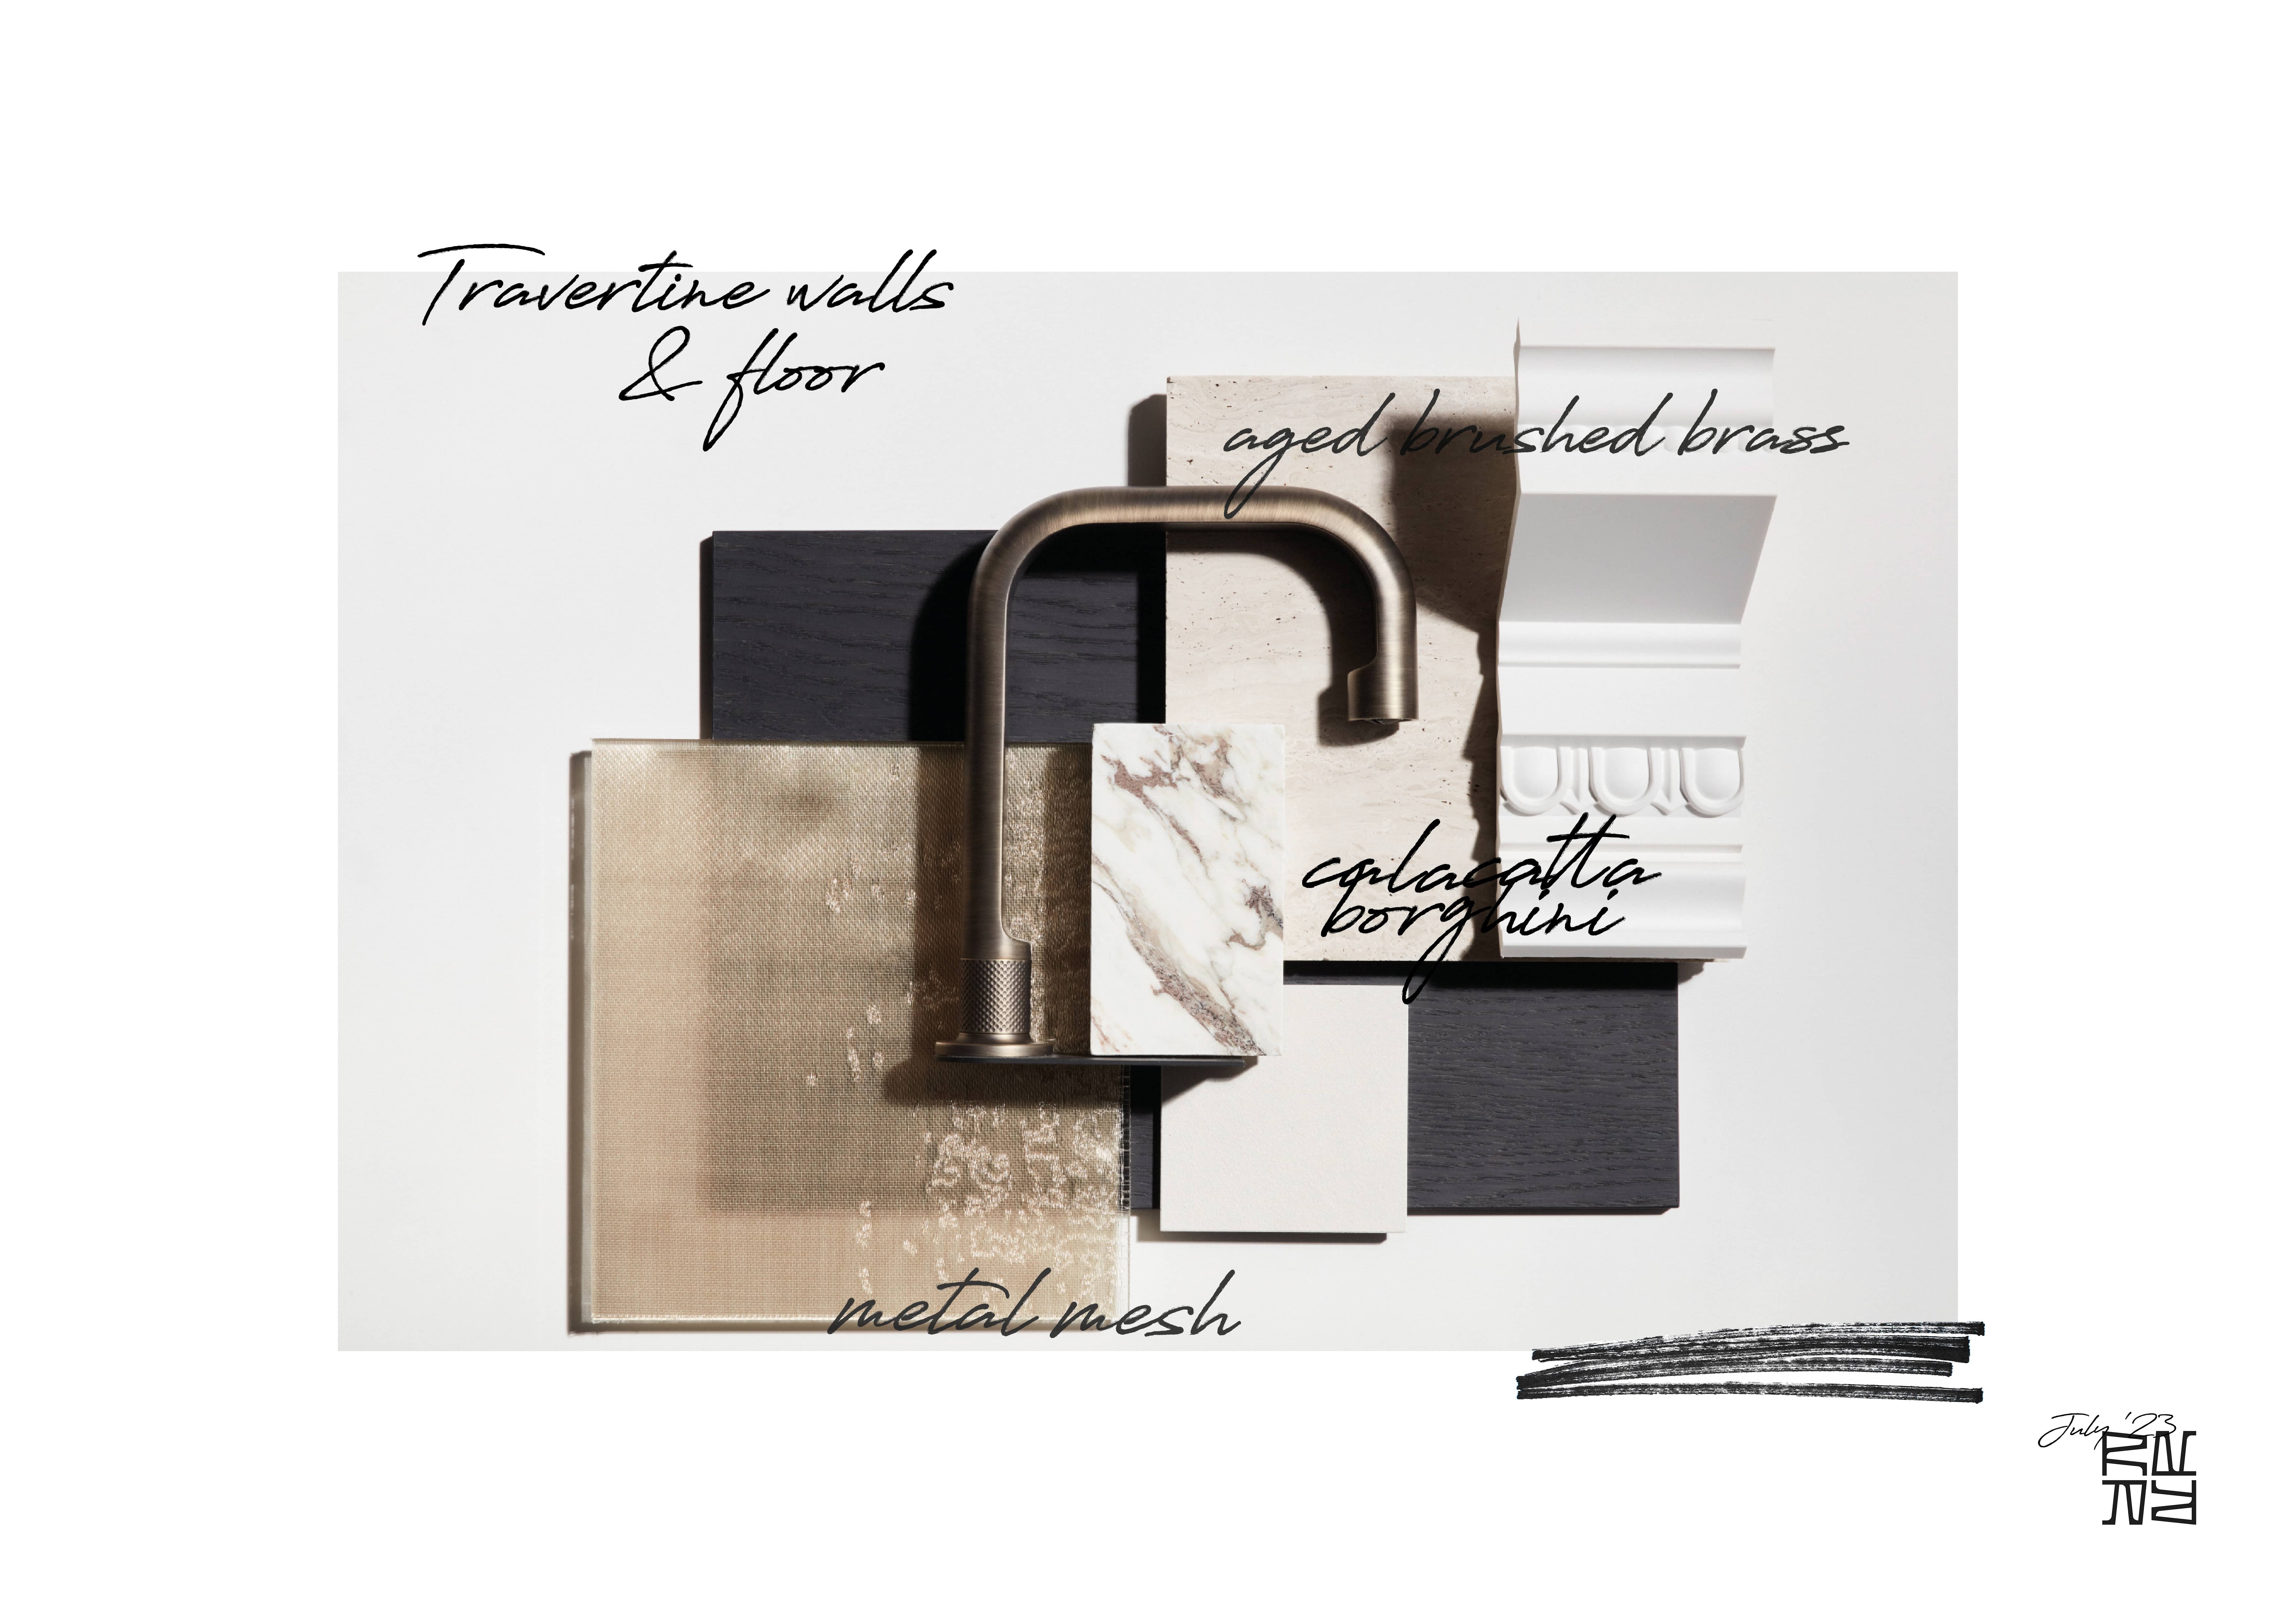 Material Moodboard Calacata Borghini aged brushed brass Gessi Faucets Travertine Reimann Architecture